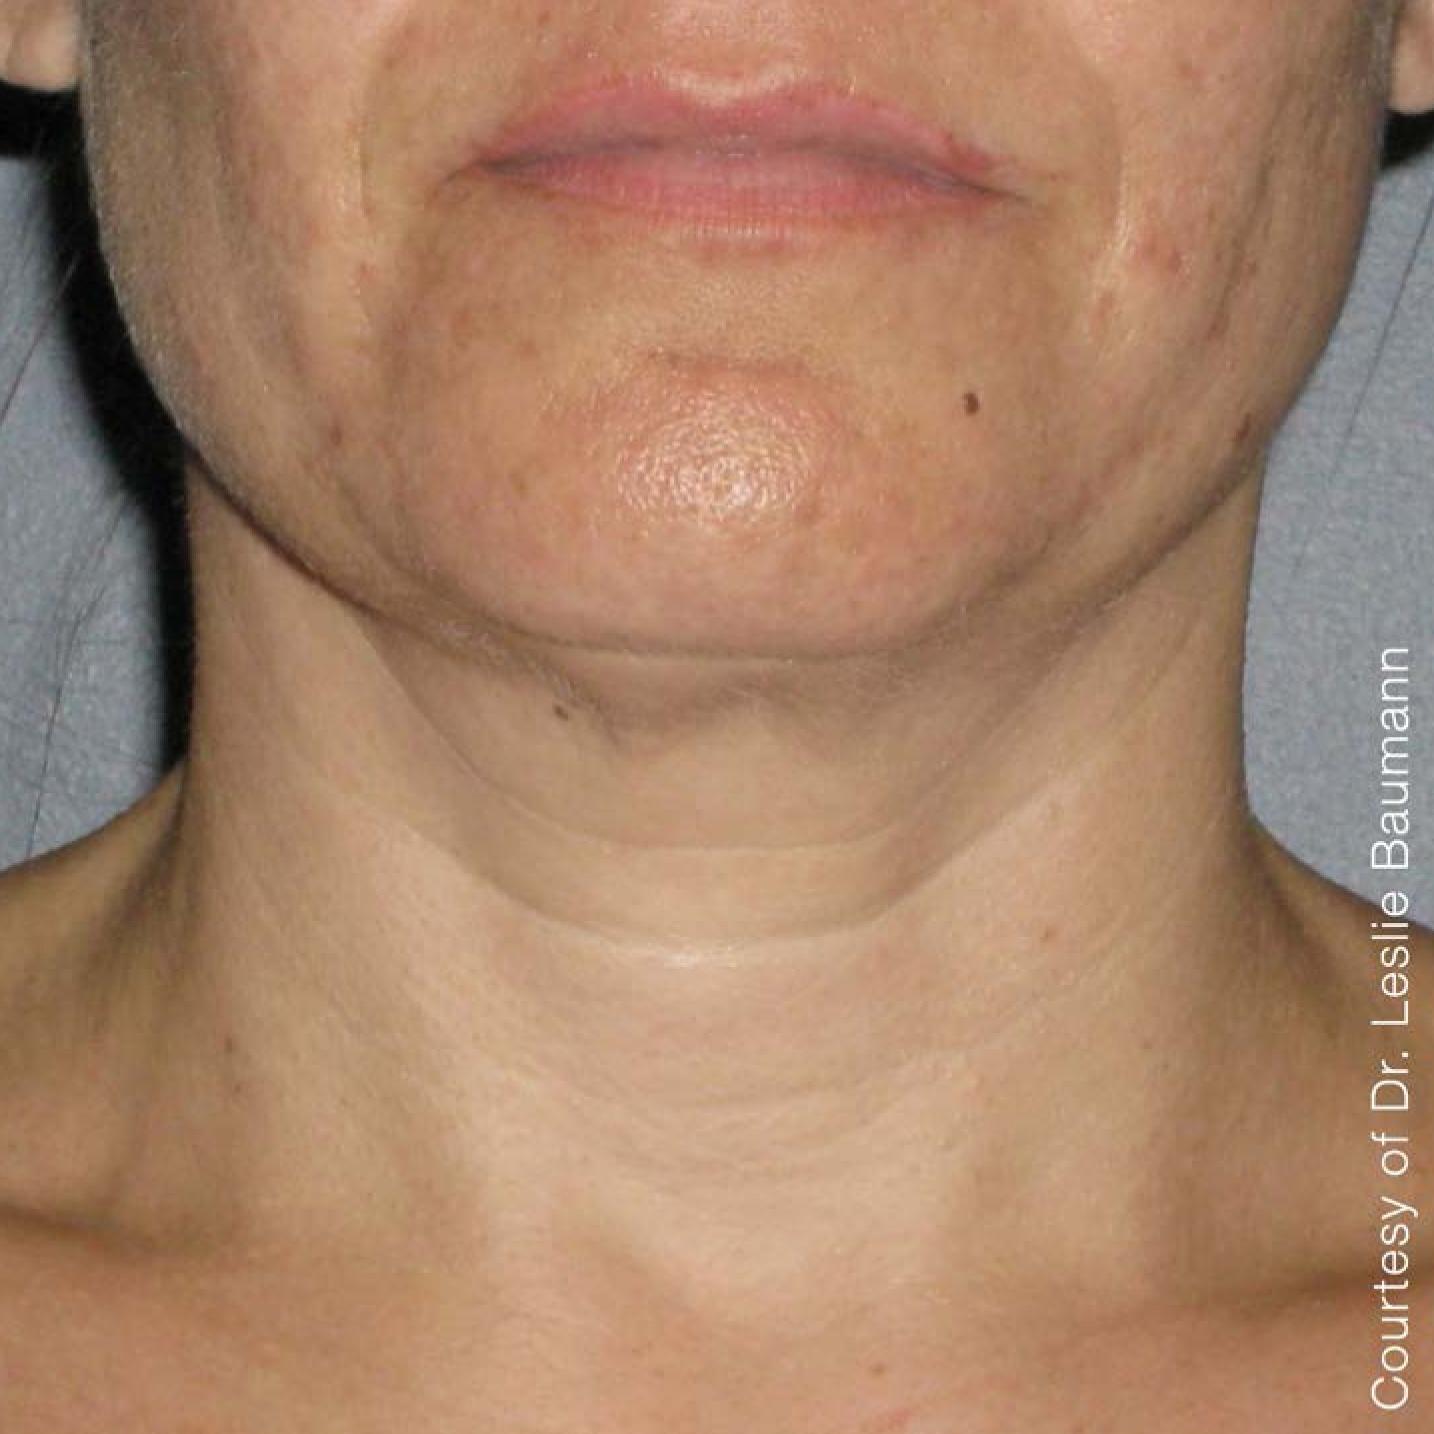 Ultherapy® - Neck: Patient 3 - After 